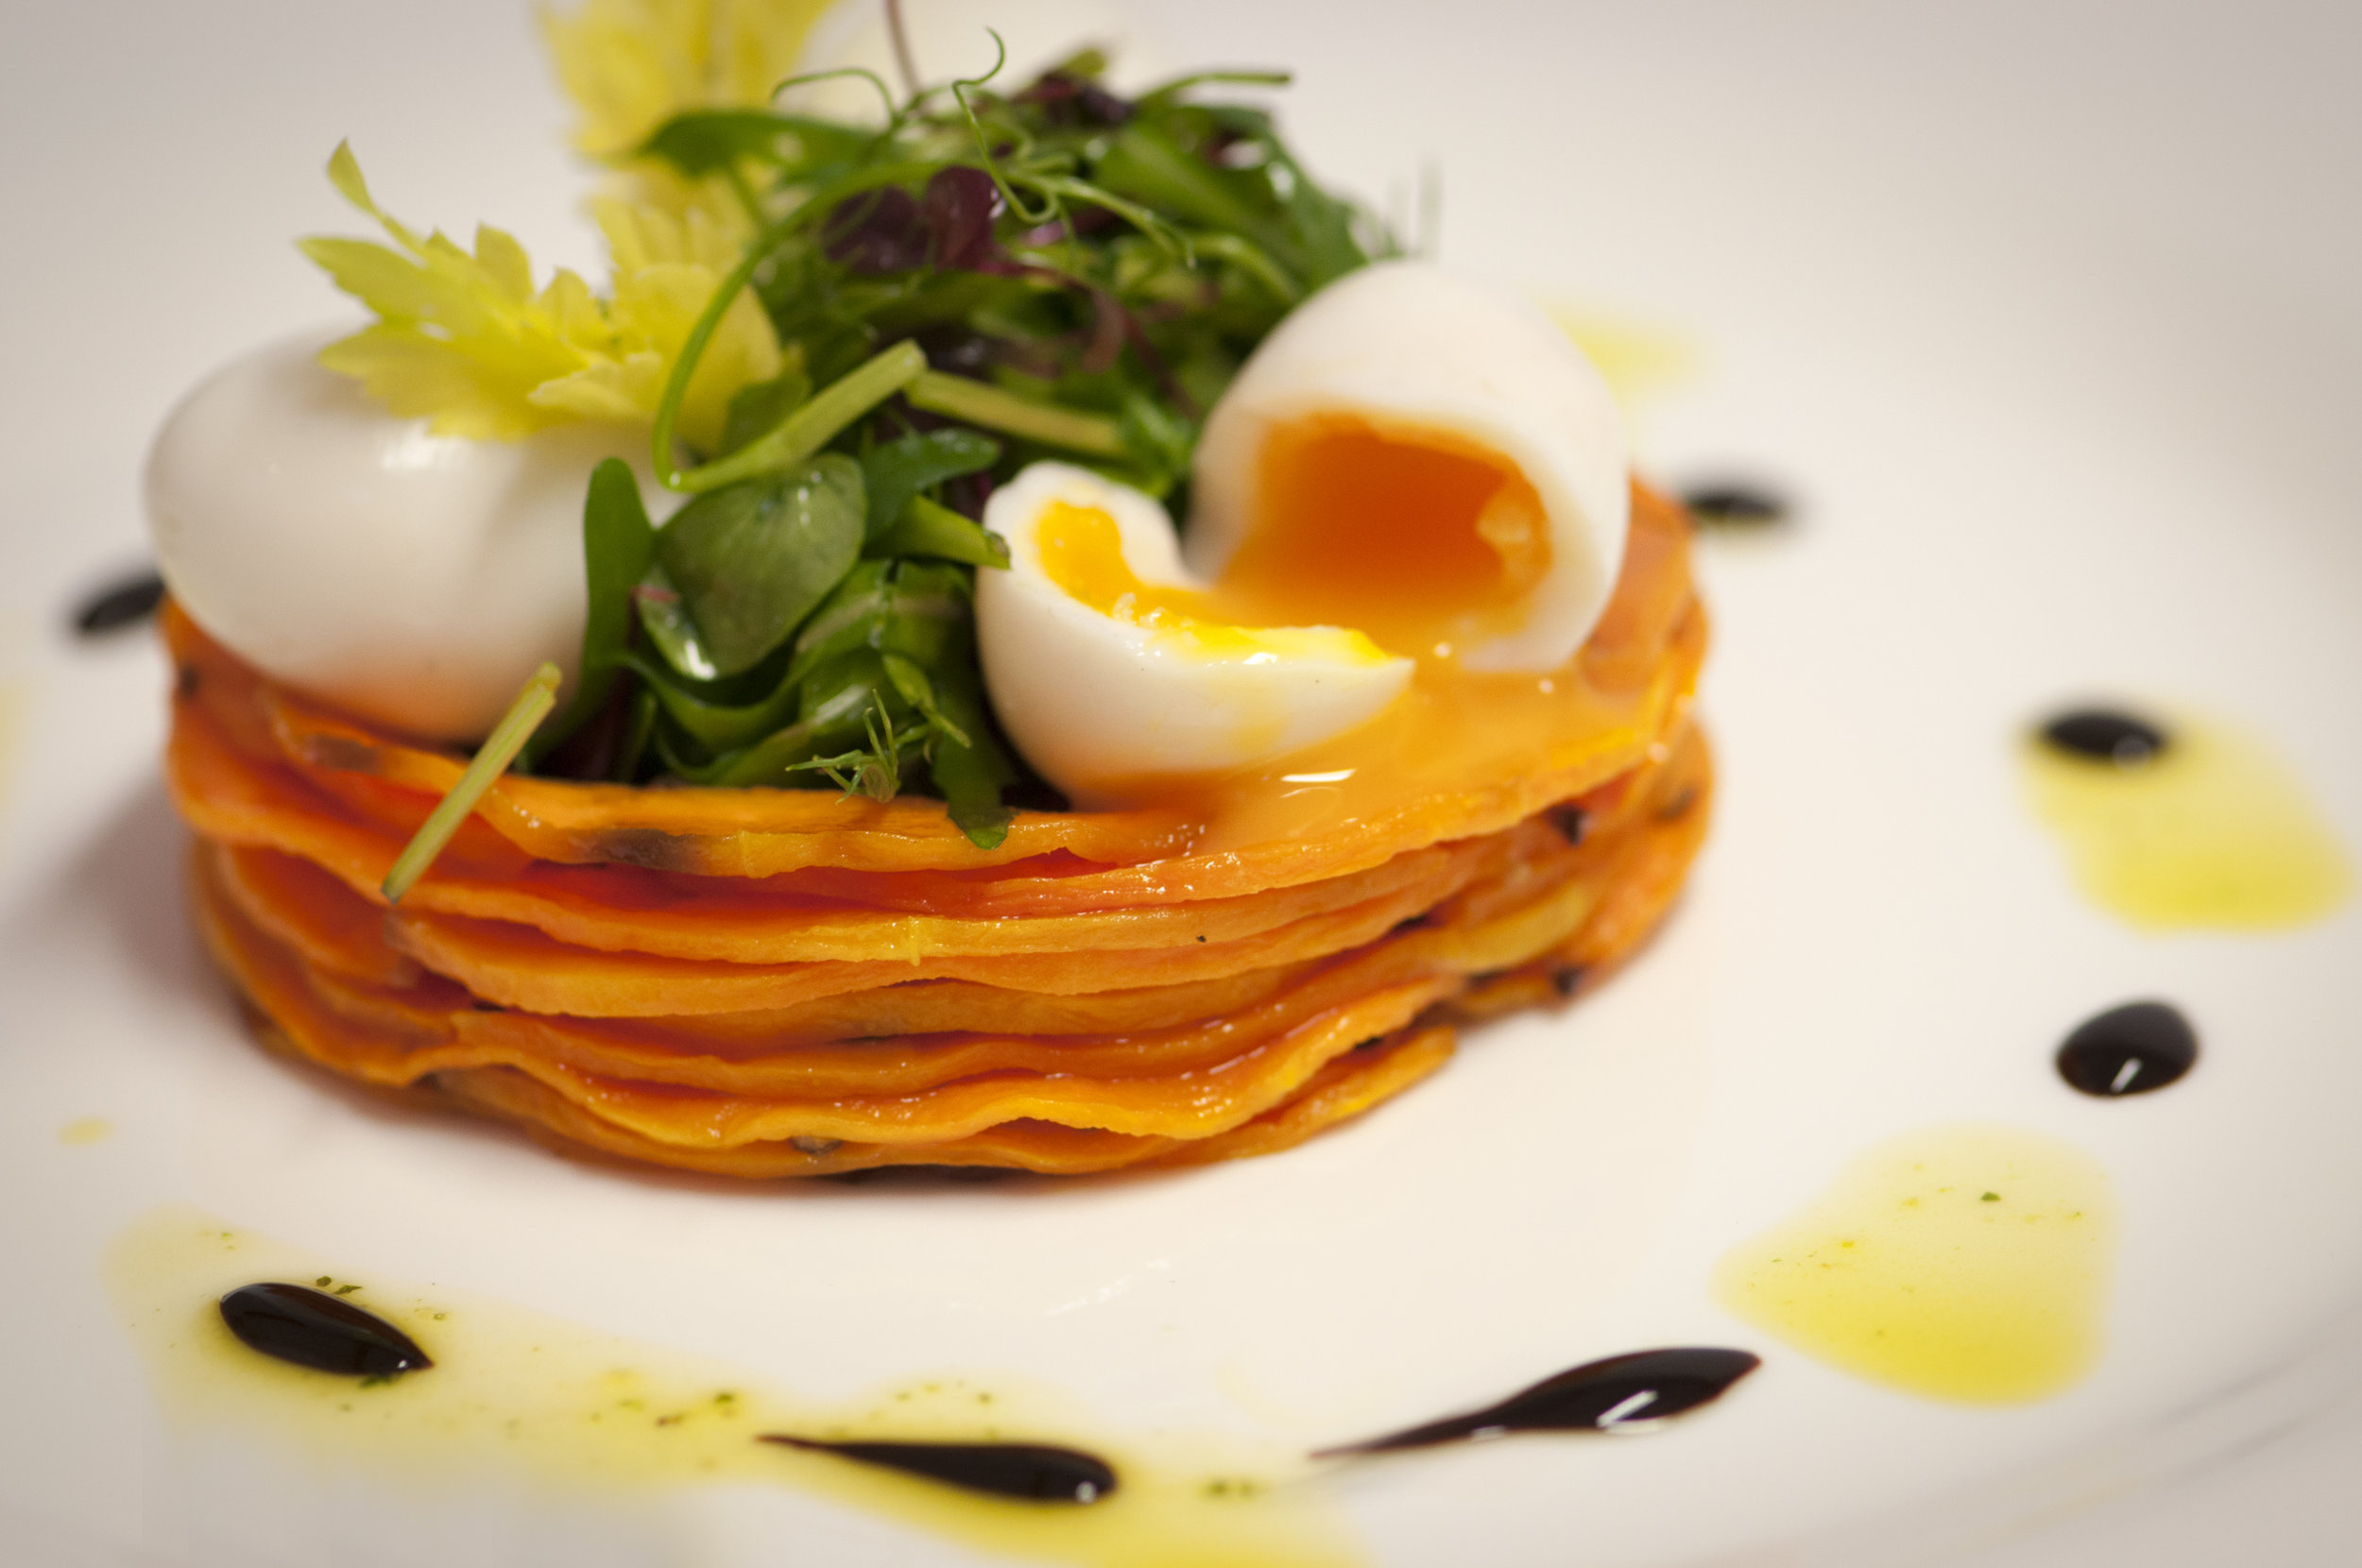 BUTTERNUT SQUASH STACK WITH QUAIL EGGS